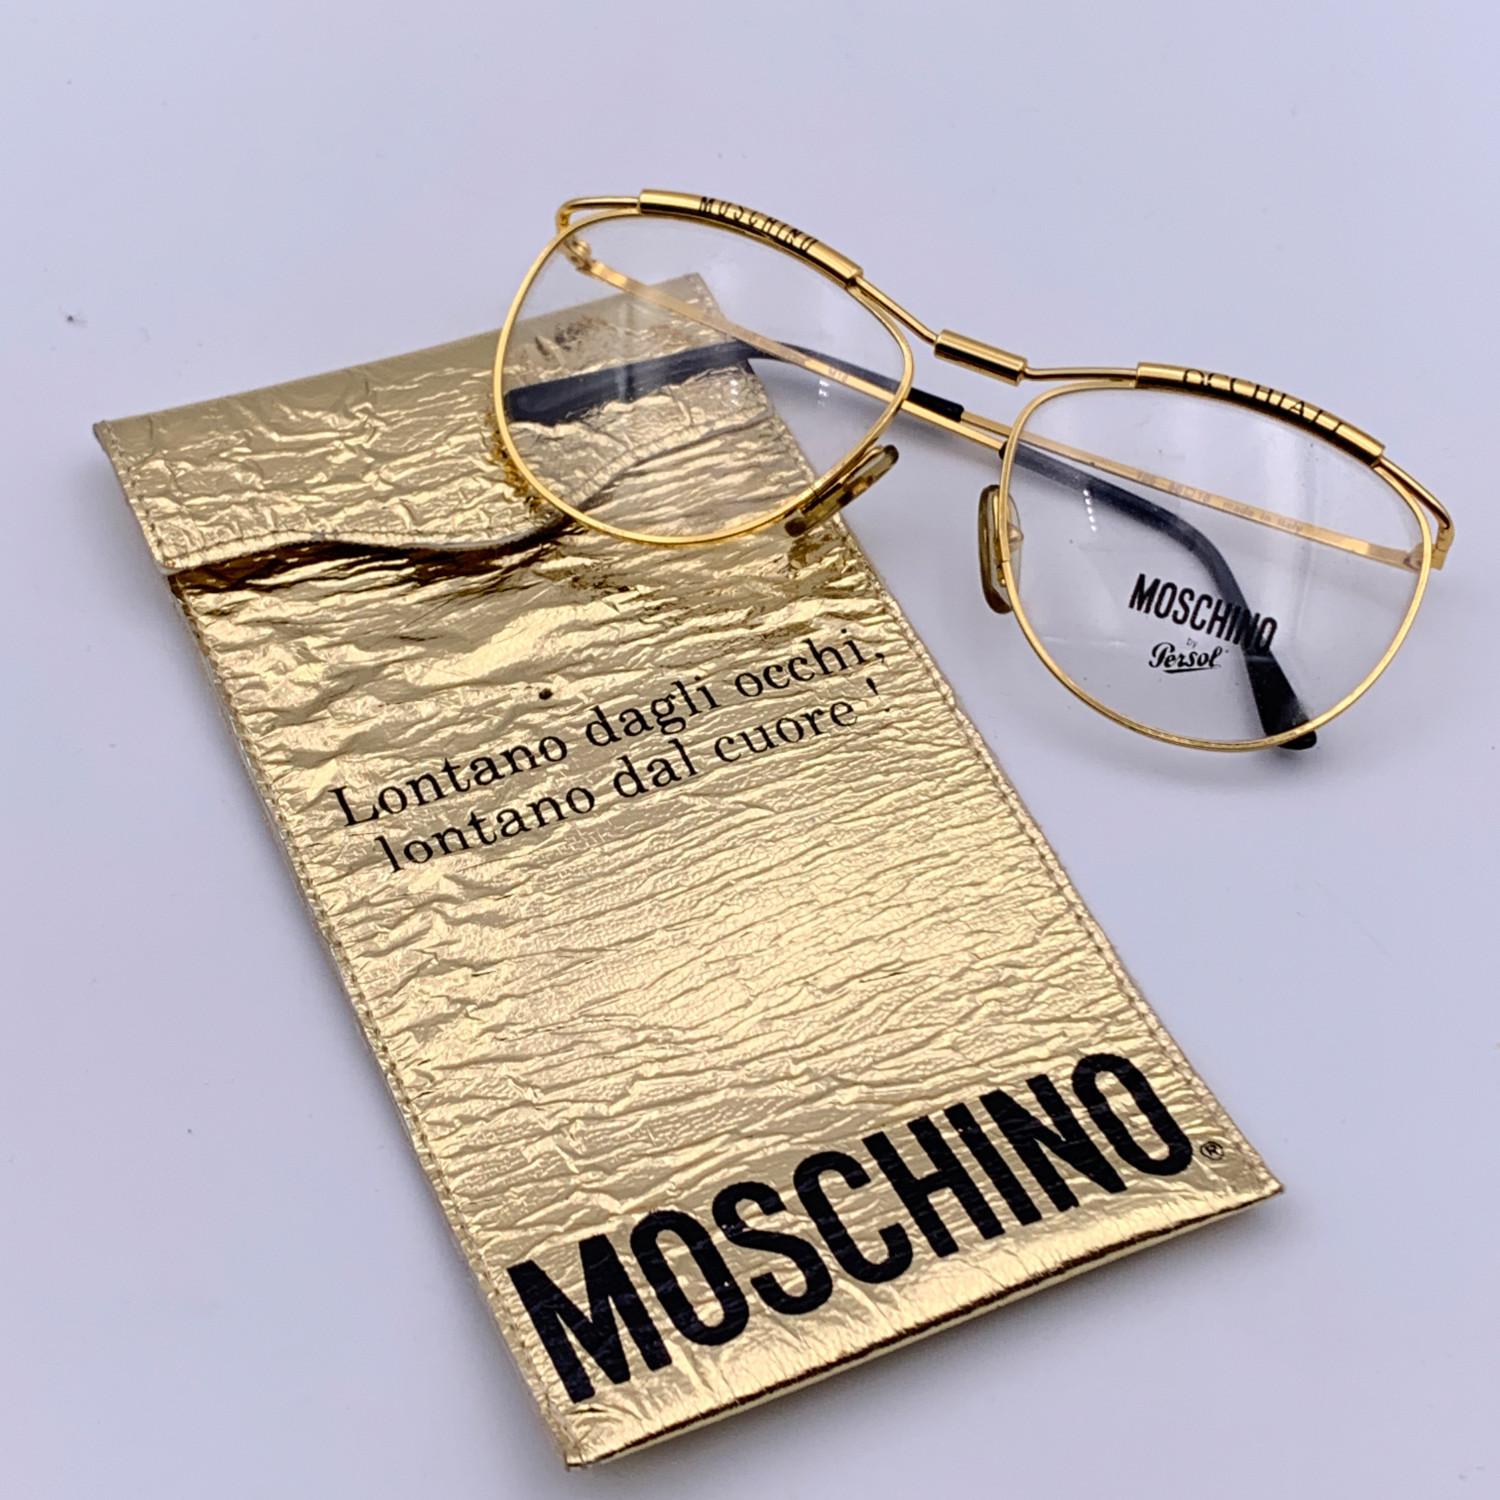 Gold metal eyeglasses by Moschino by Persol. Oval design. Model: M18. 56/18 - 135 mm. 'Moschino' and 'Occhiali' embossed on the upper part of the frame.Clear demo lens. Made in Italy

Details

MATERIAL: Metal

COLOR: Gold

MODEL: M18

GENDER: